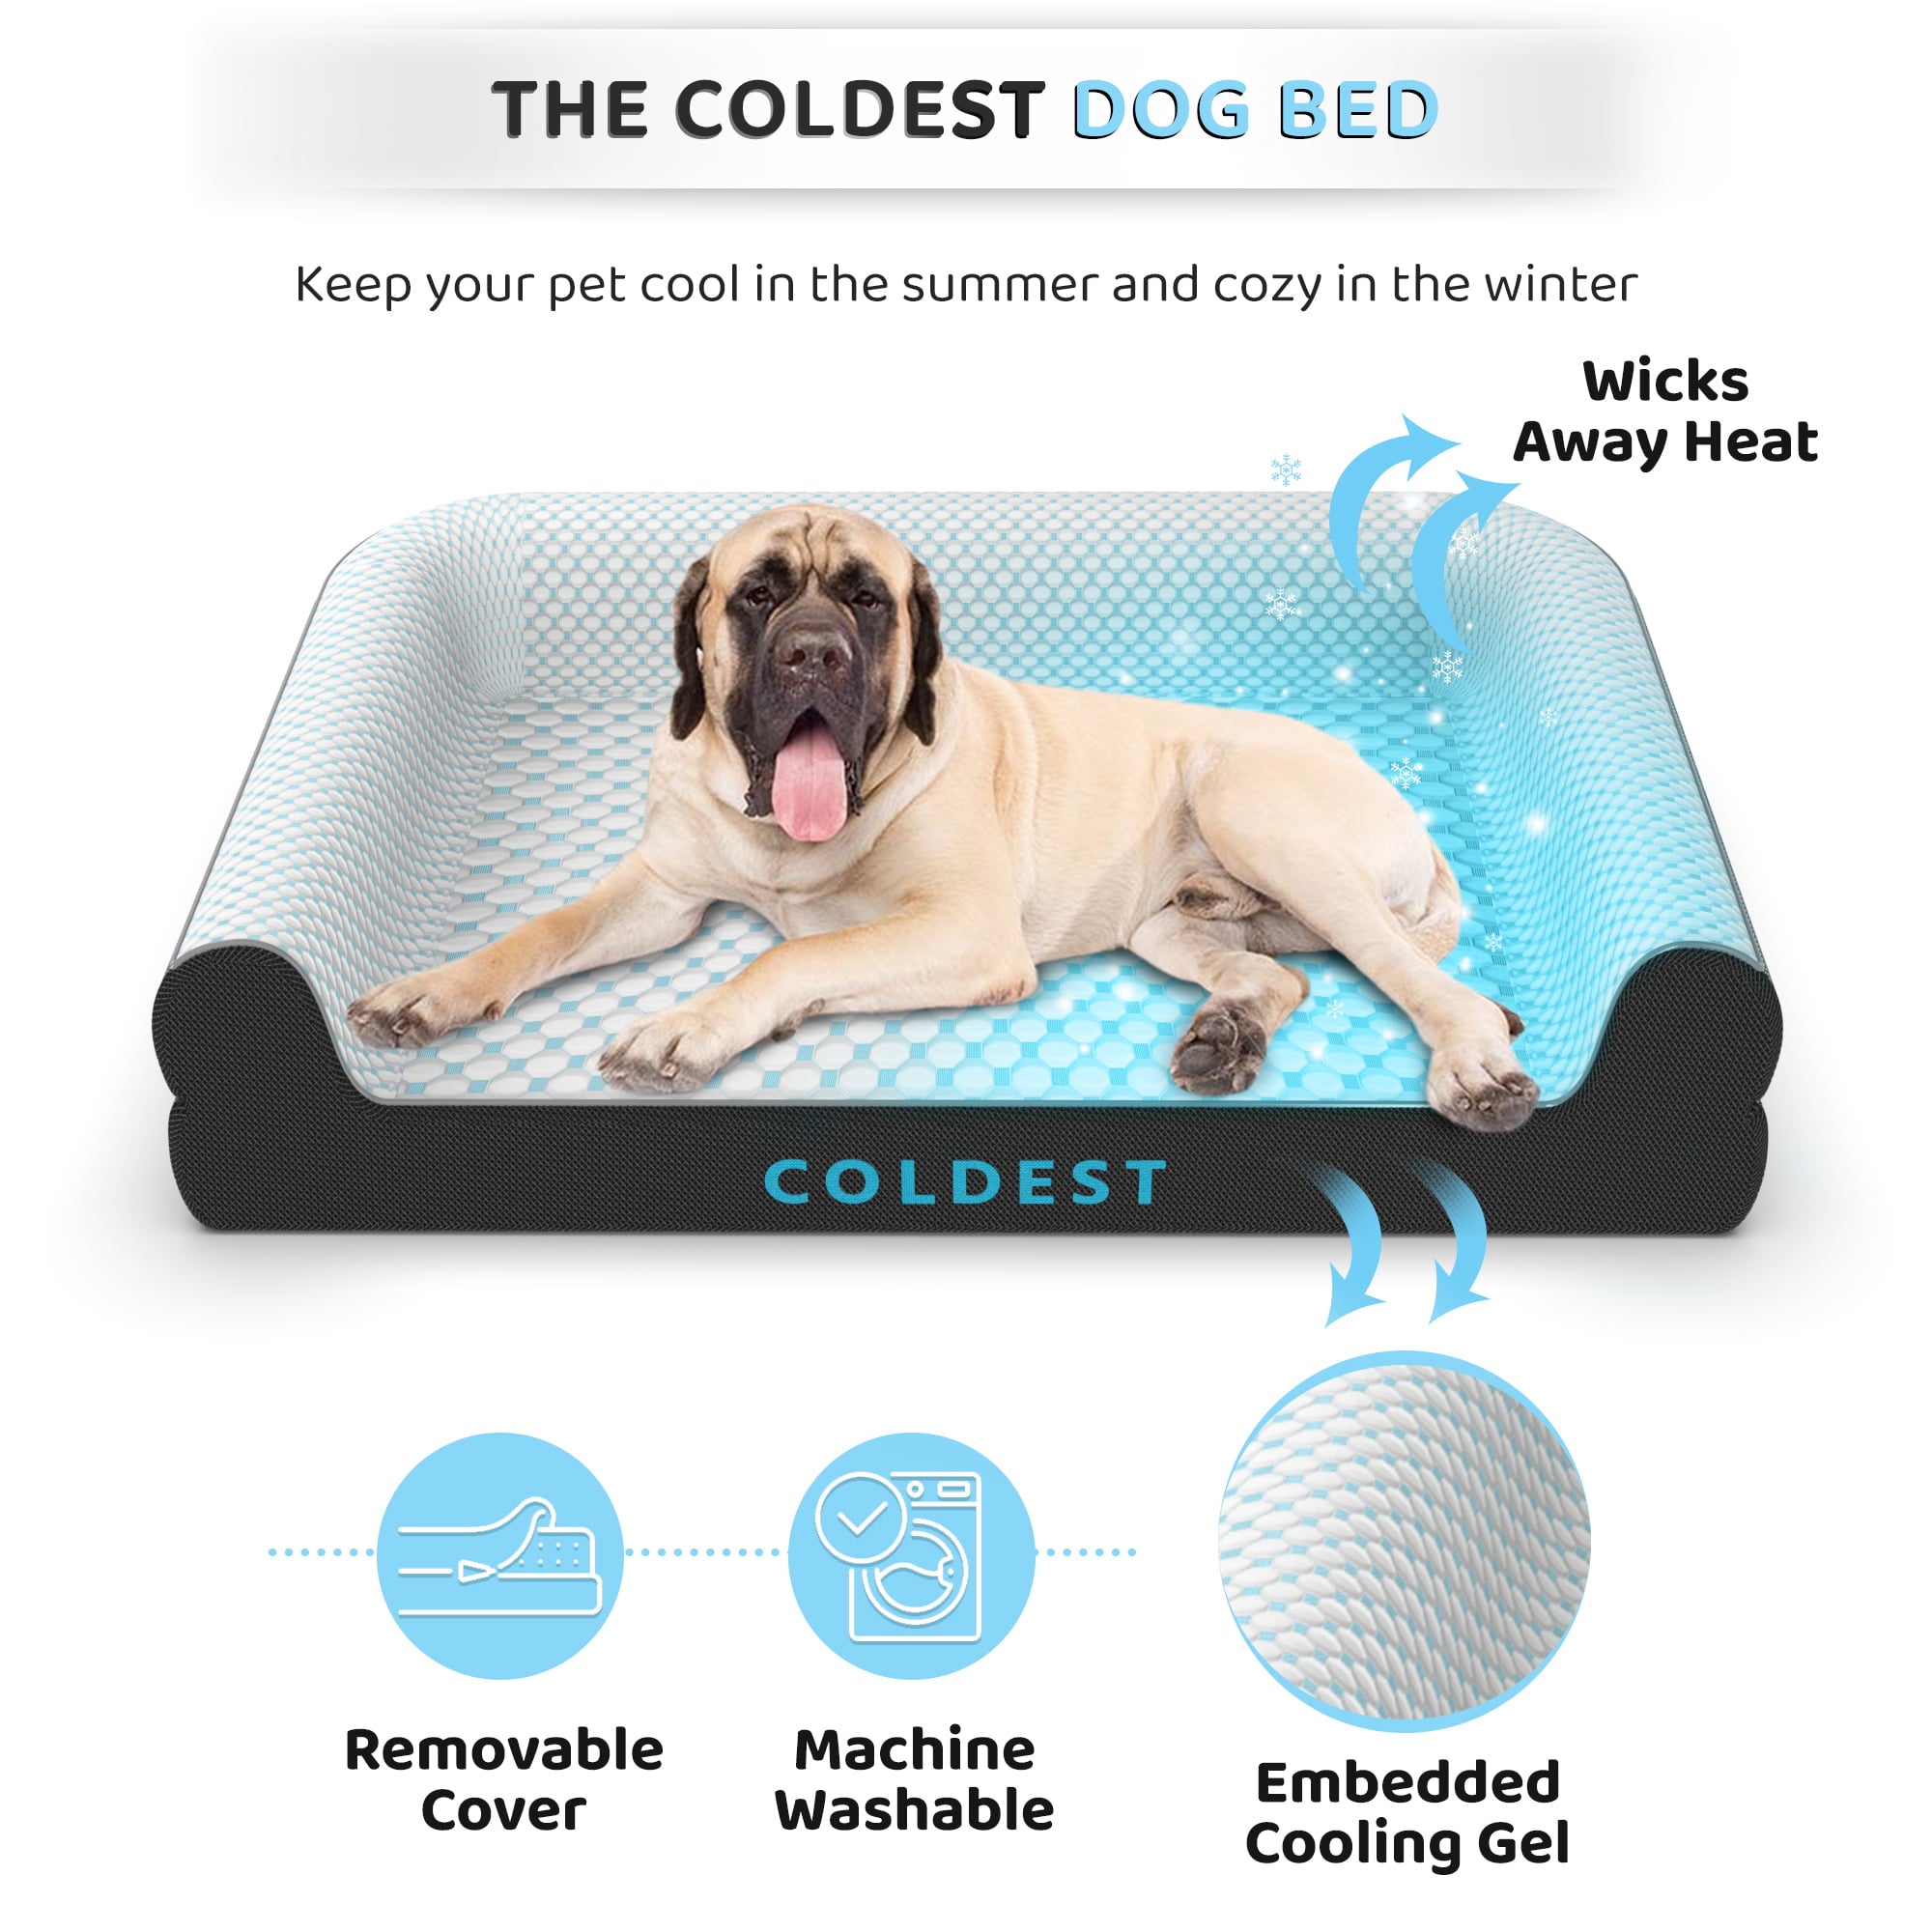 dog bed features